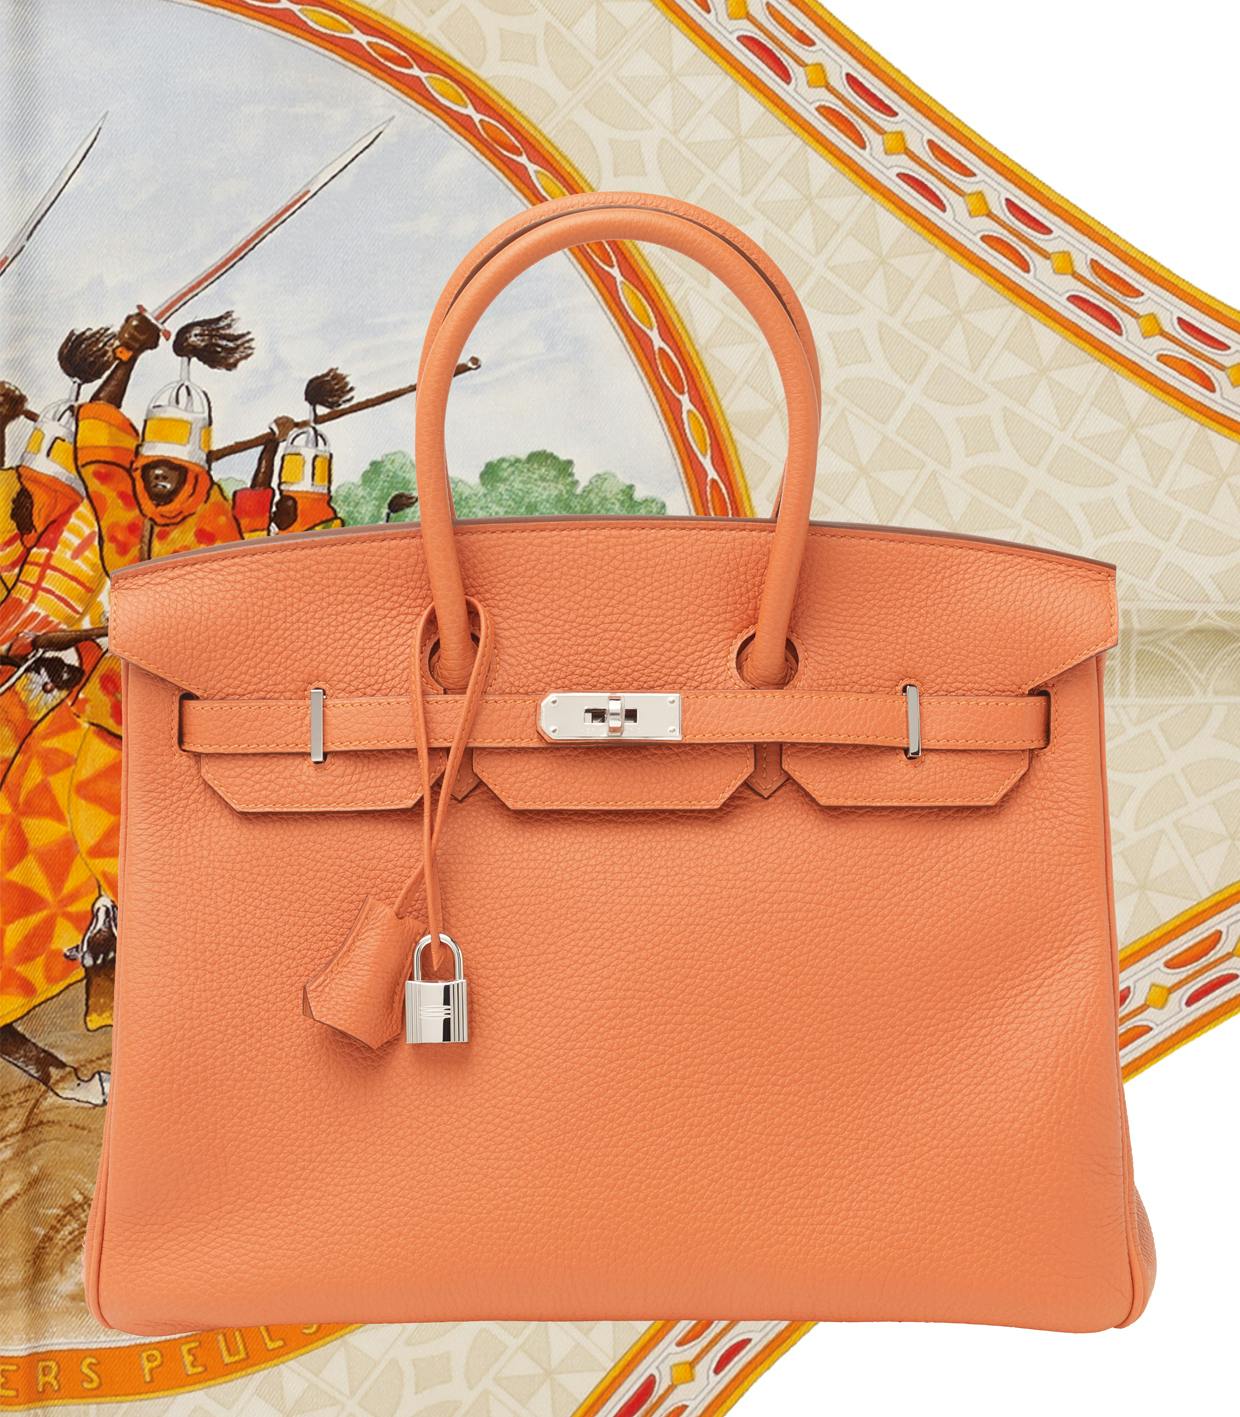 Who said laying on a sofa can't be chic? Hermes Birkin 35 Matte